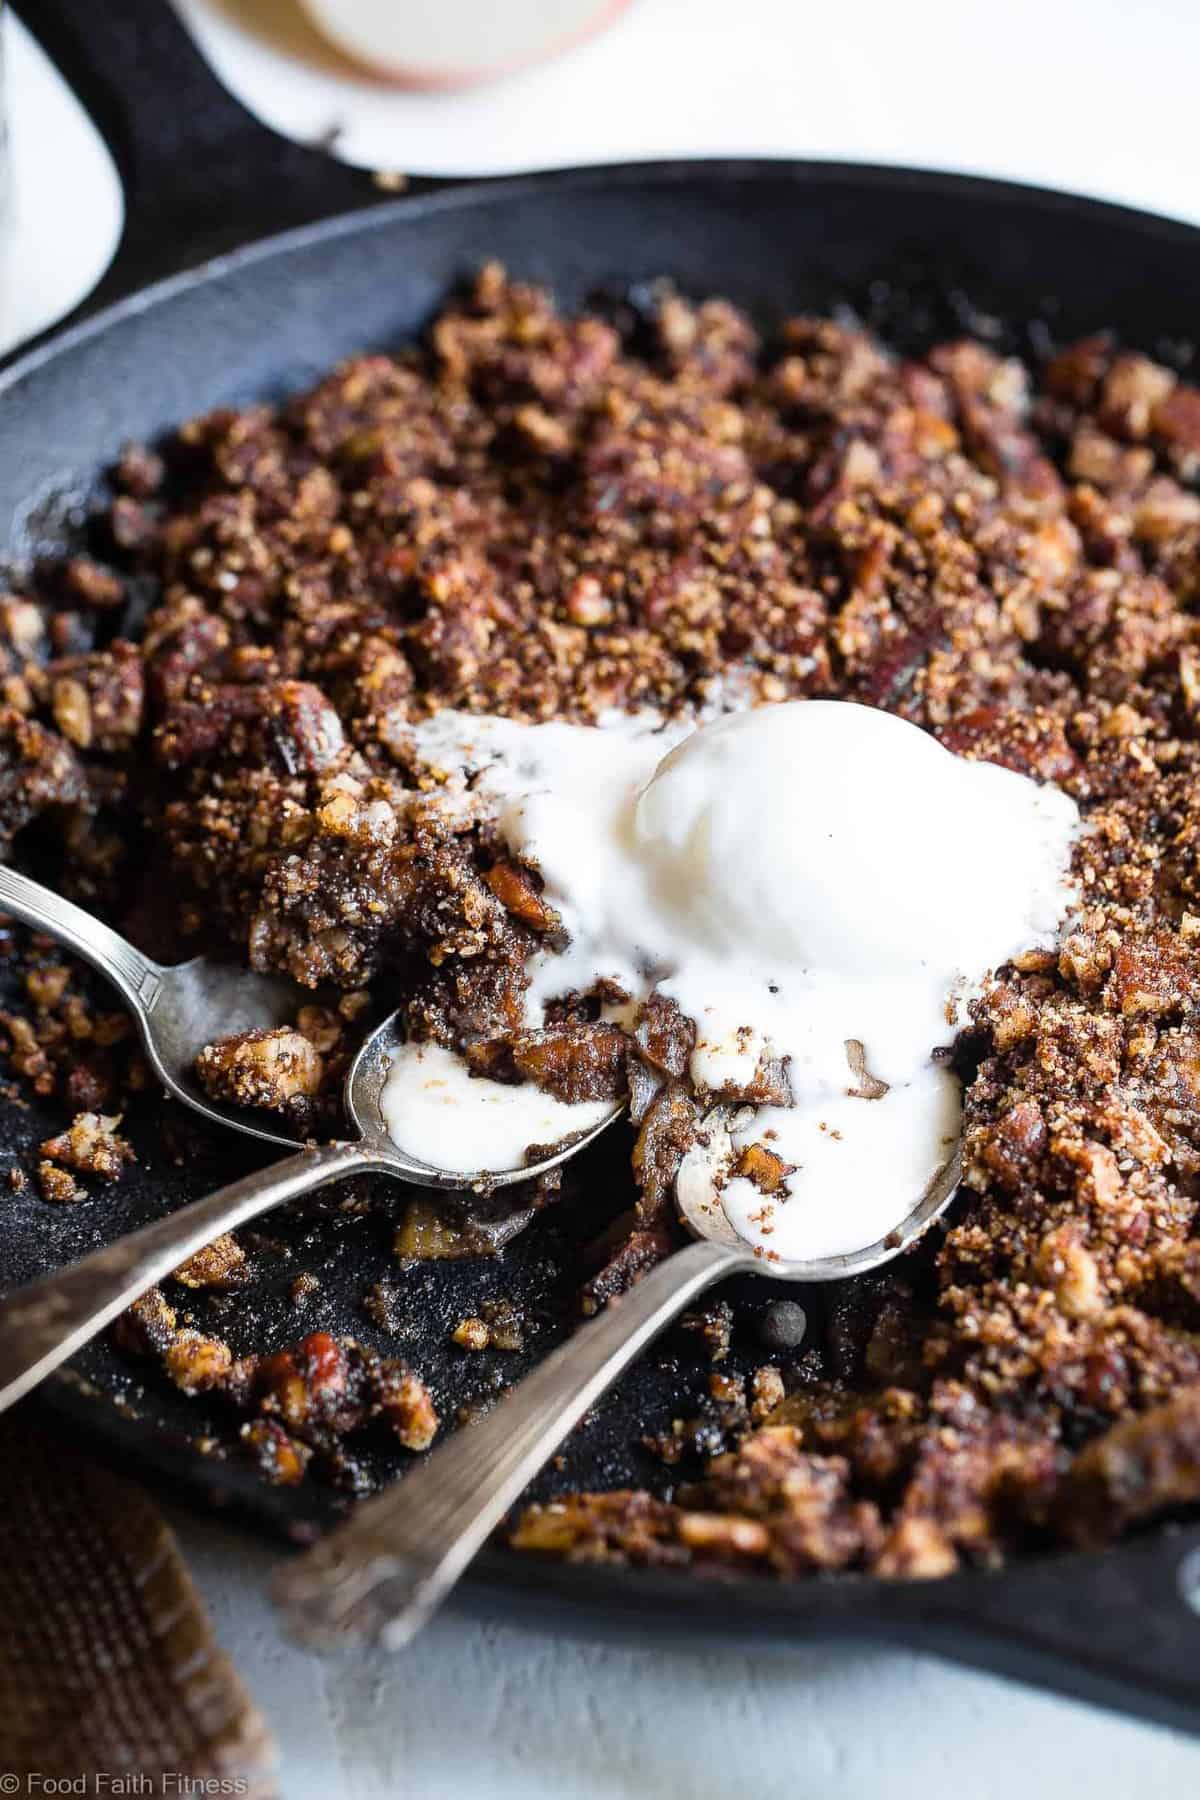 The BEST Paleo Vegan Apple Crisp with Coconut Flour - An EASY, cozy fall dessert made with simple, wholesome ingredients! Perfectly crispy, and spicy-sweet that you won't believe it's gluten free, dairy free and better for you! | #Foodfaithfitness | #Vegan #Paleo #Healthy #Glutenfree #Dairyfree